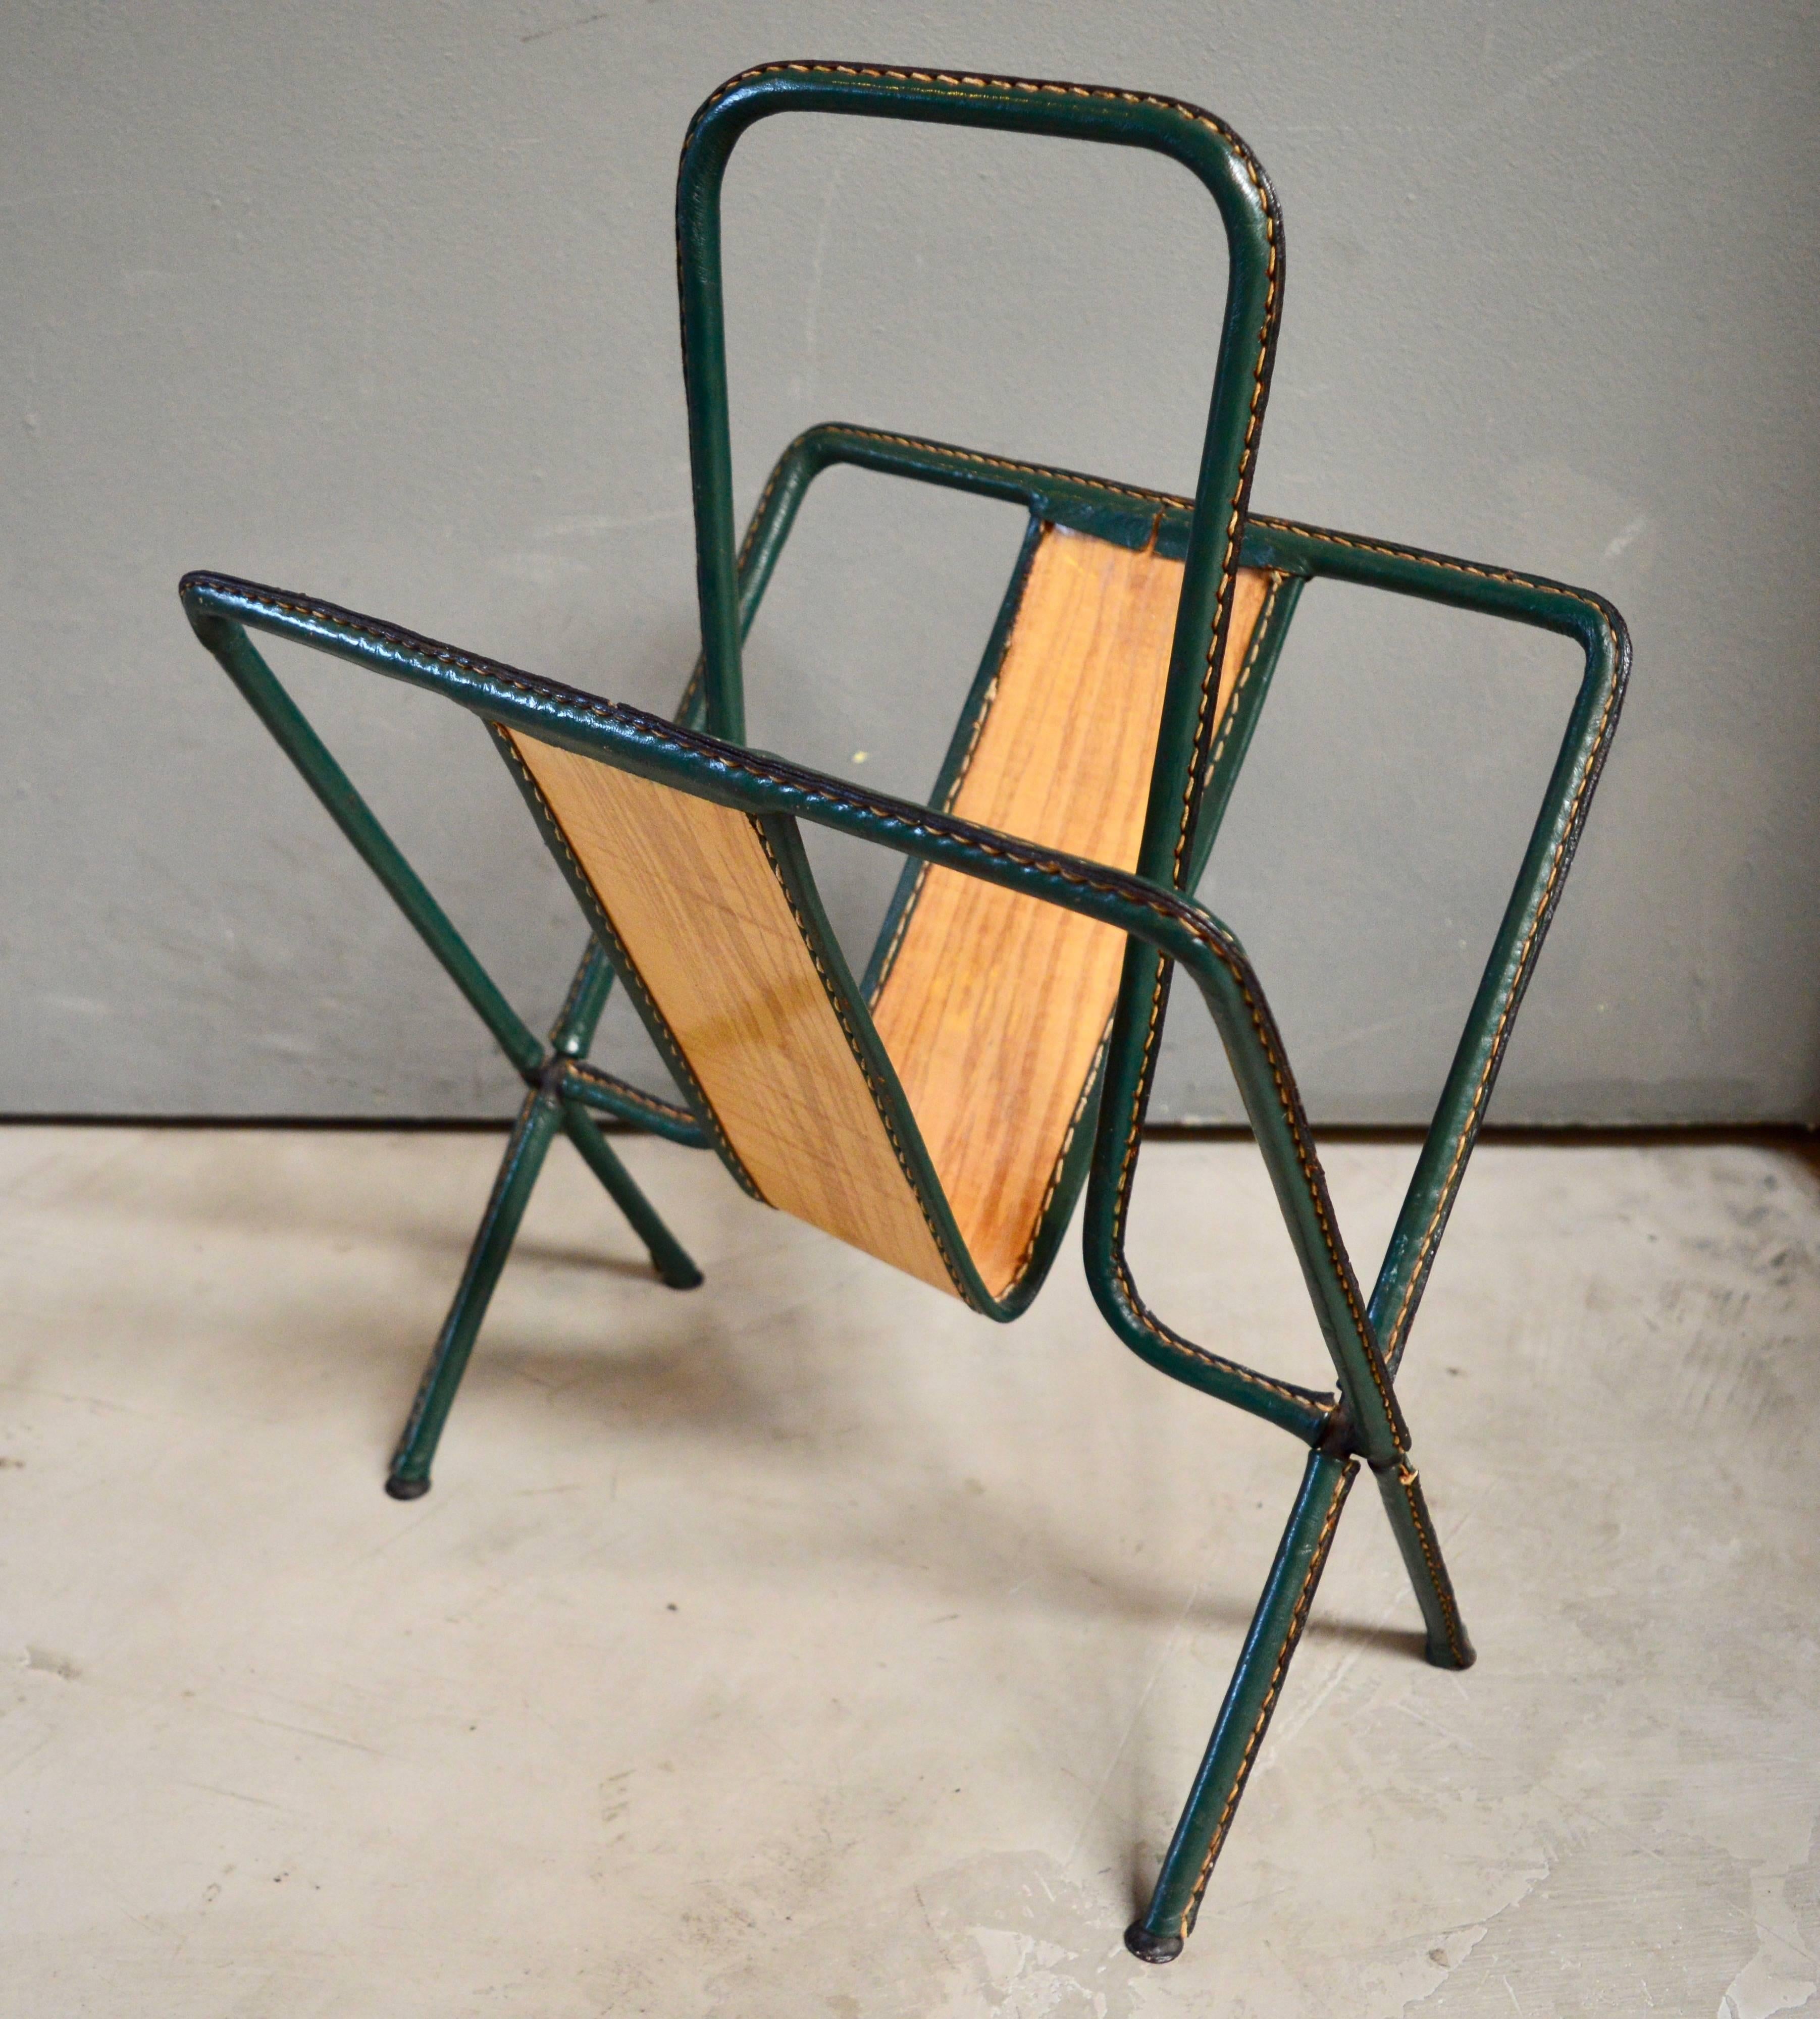 Very rare magazine rack entirely wrapped in green leather by Jacques Adnet. Inlaid wood in the middle of the rack. Very rare piece. Excellent vintage condition.